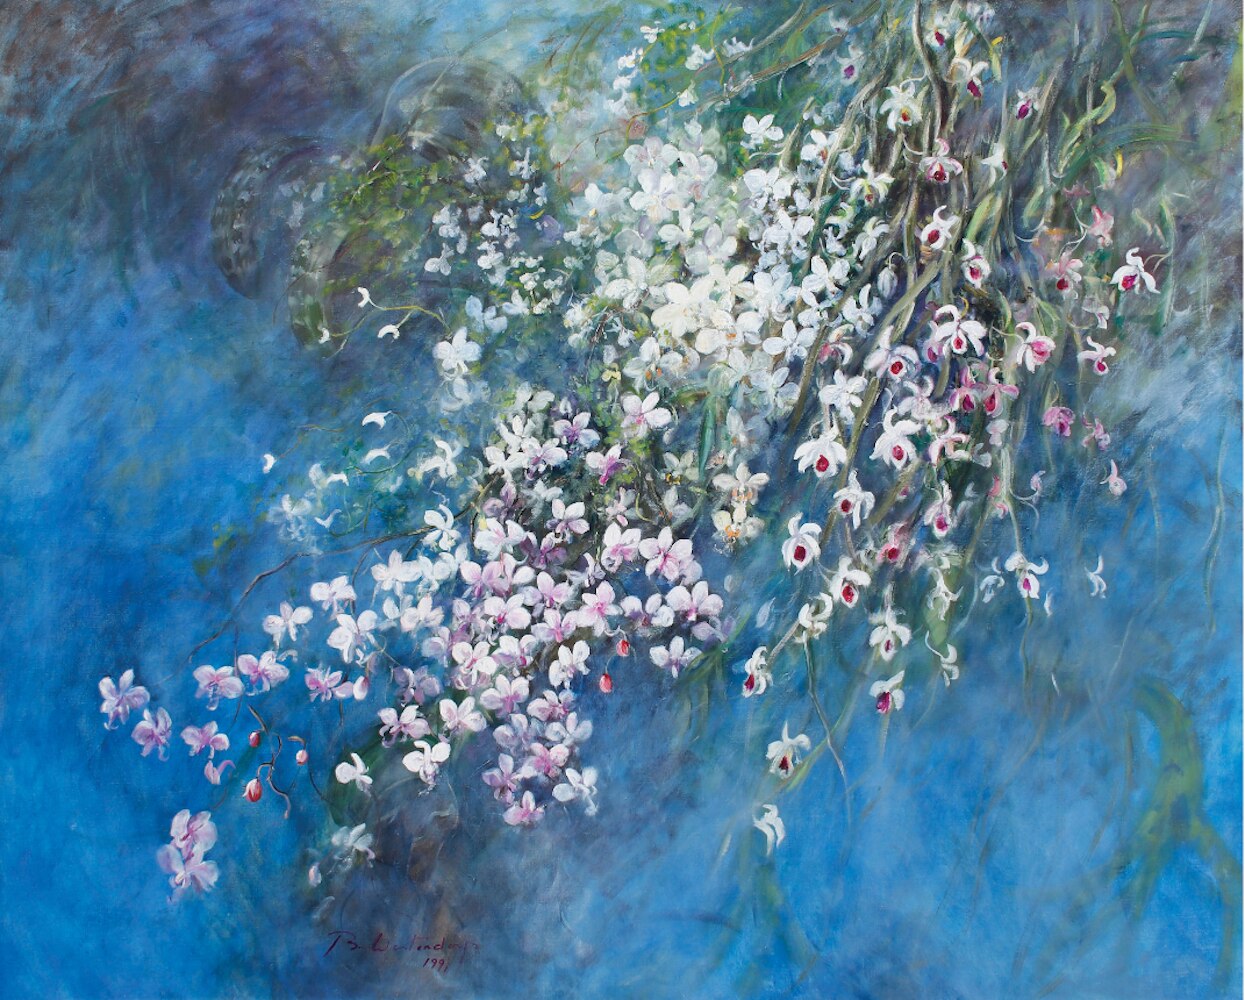 Lot 111 “A Cascade of Orchids” by Betsy Westendorp 